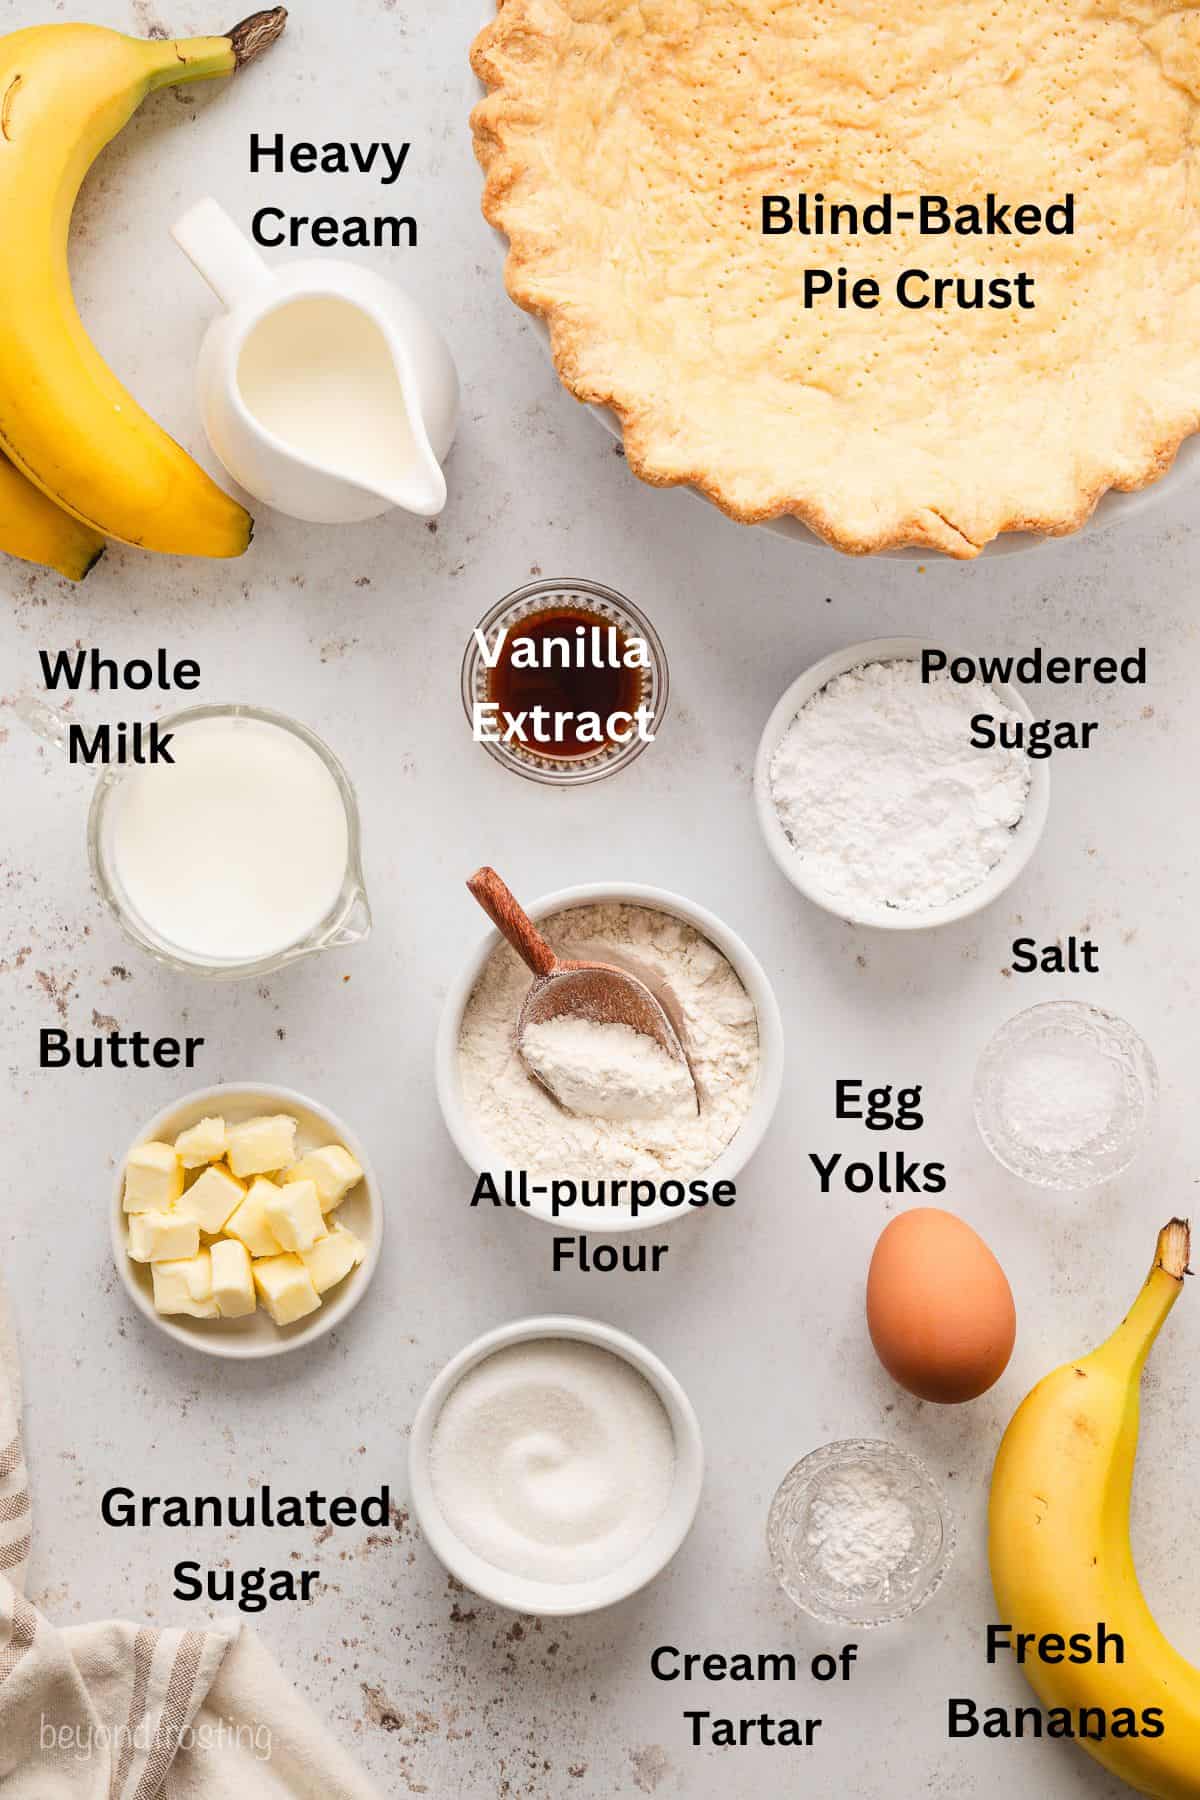 Ingredients for banana cream pie with text labels overlaying each ingredient.